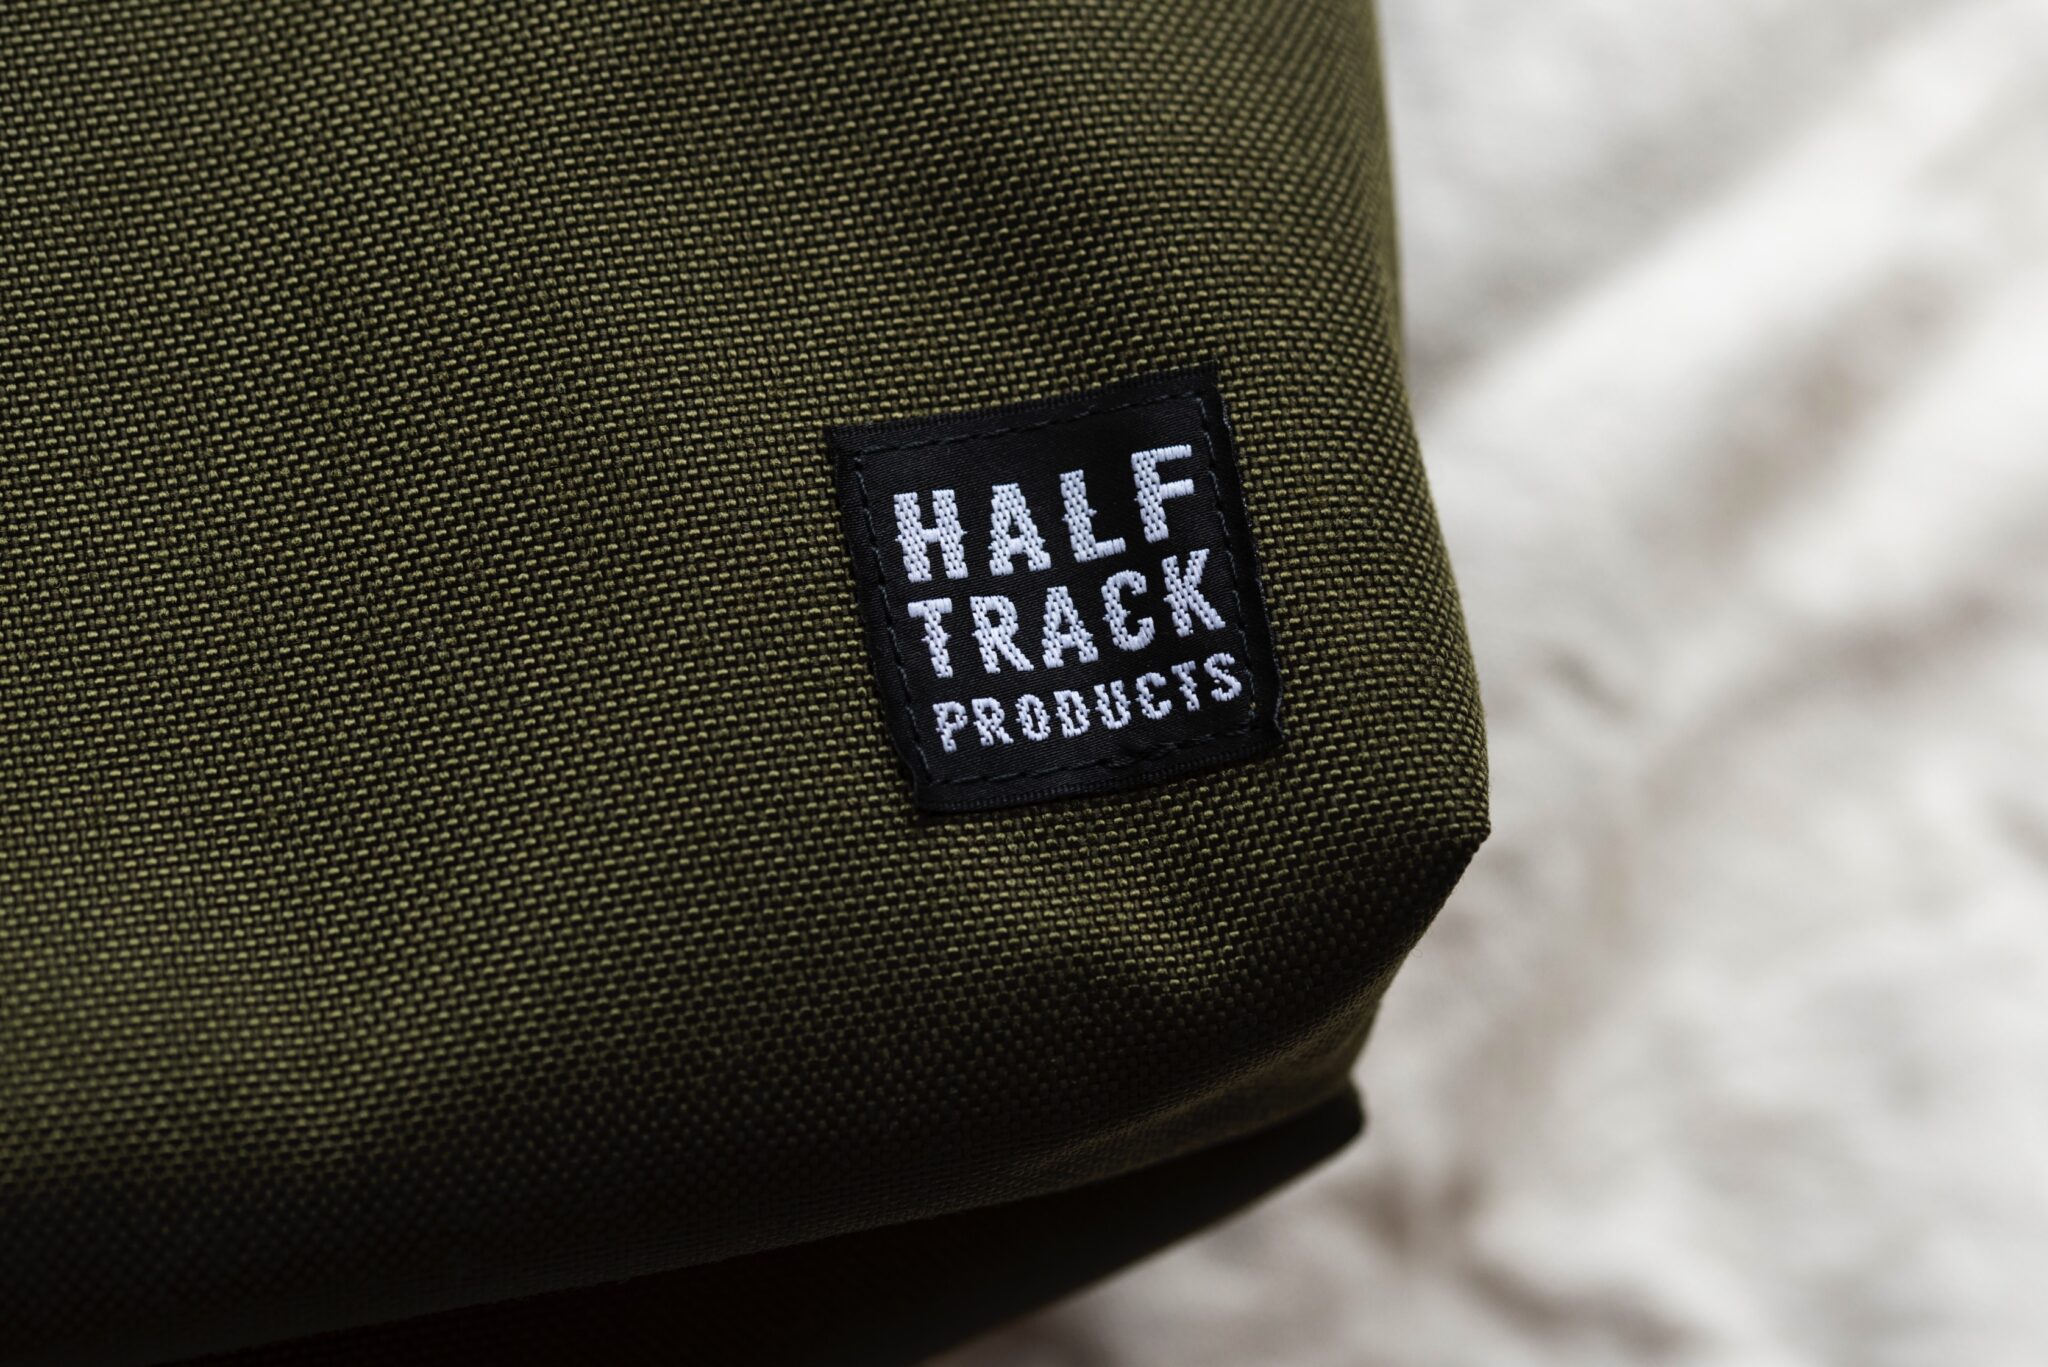 Photo: brand name tag of HALF TRACK PRODUCTS